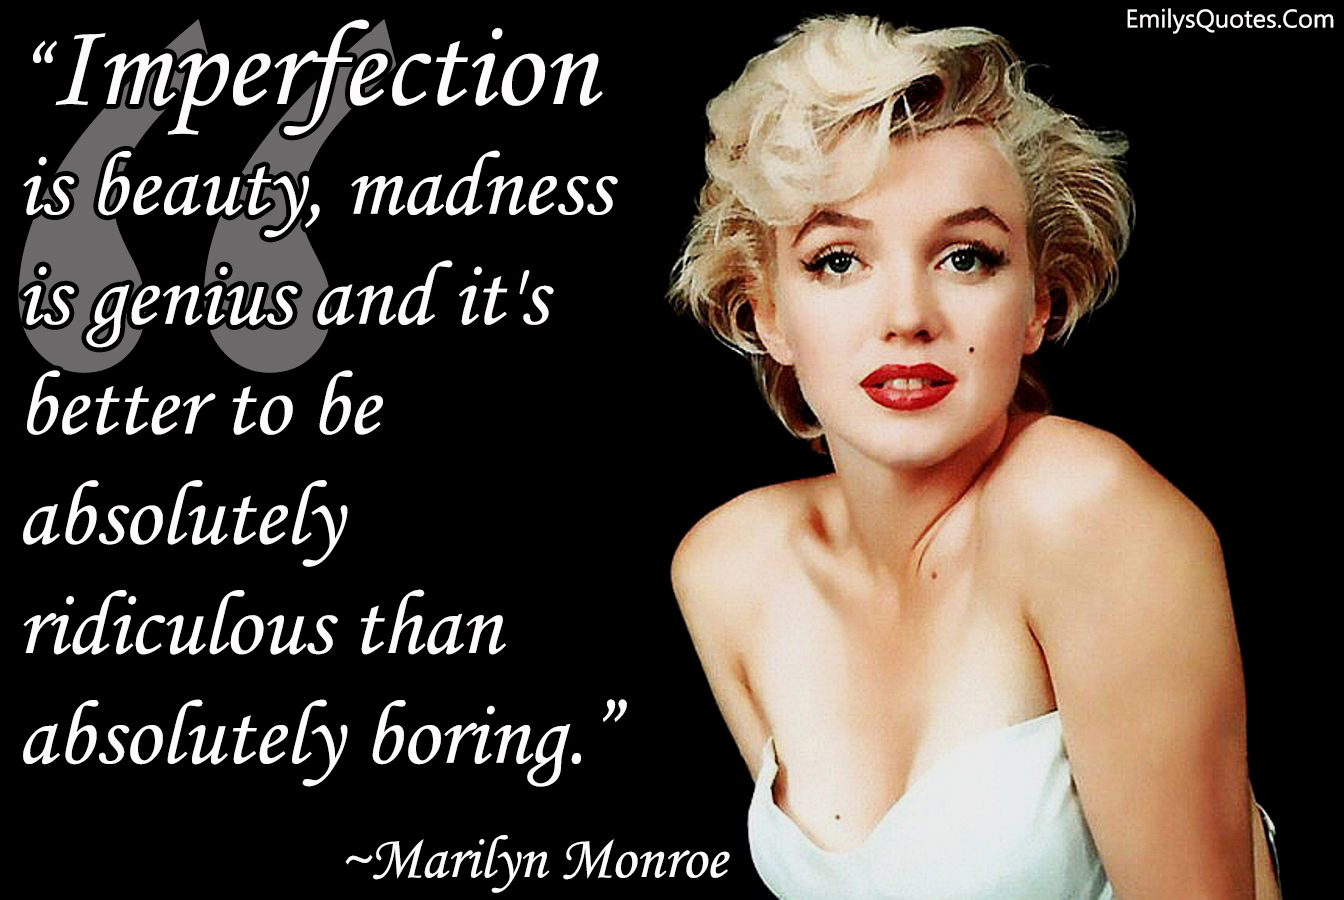 Imperfection is beauty, madness is genius and it’s better to be absolutely ridiculous than absolutely boring.